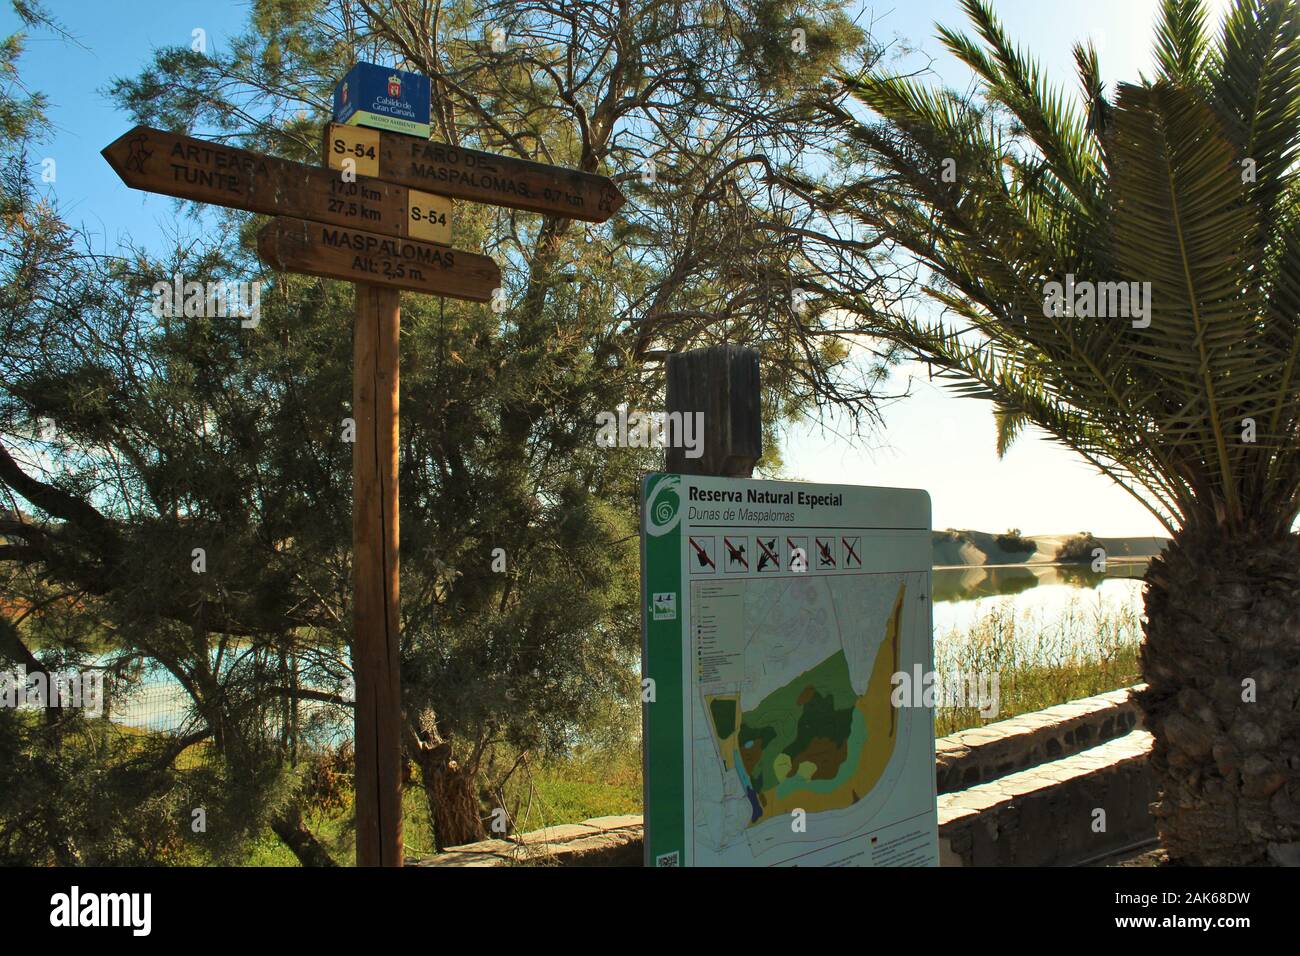 A signpost and information sign overlooking the nature reserve in Maspalomas, Gran Canaria. Stock Photo